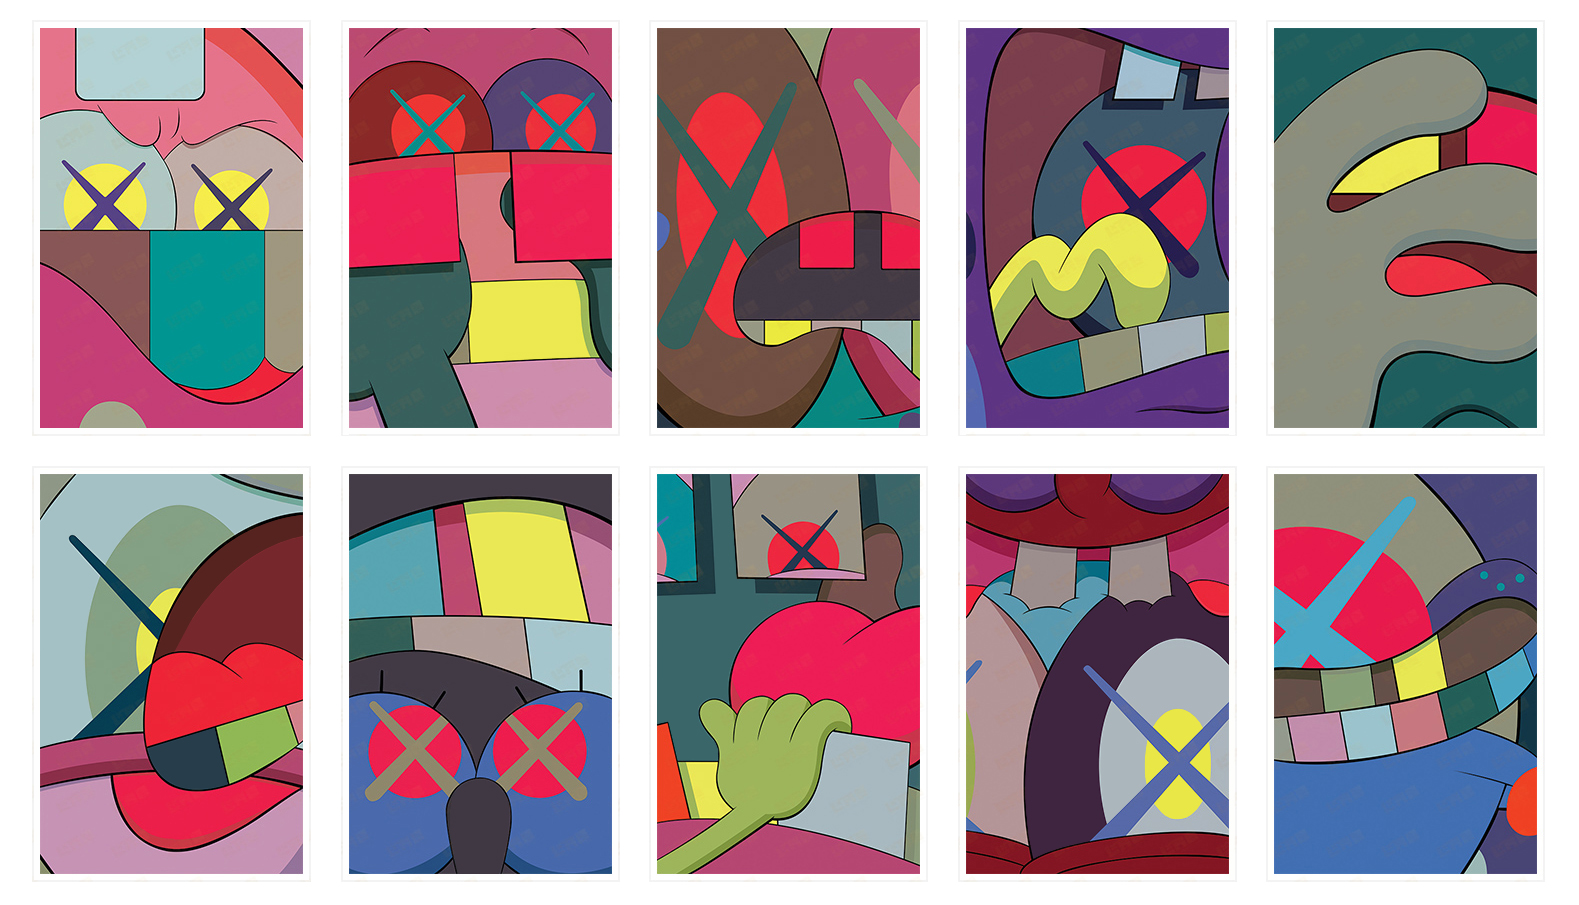 KAWS, Ups and Downs (complete set of 10 works)